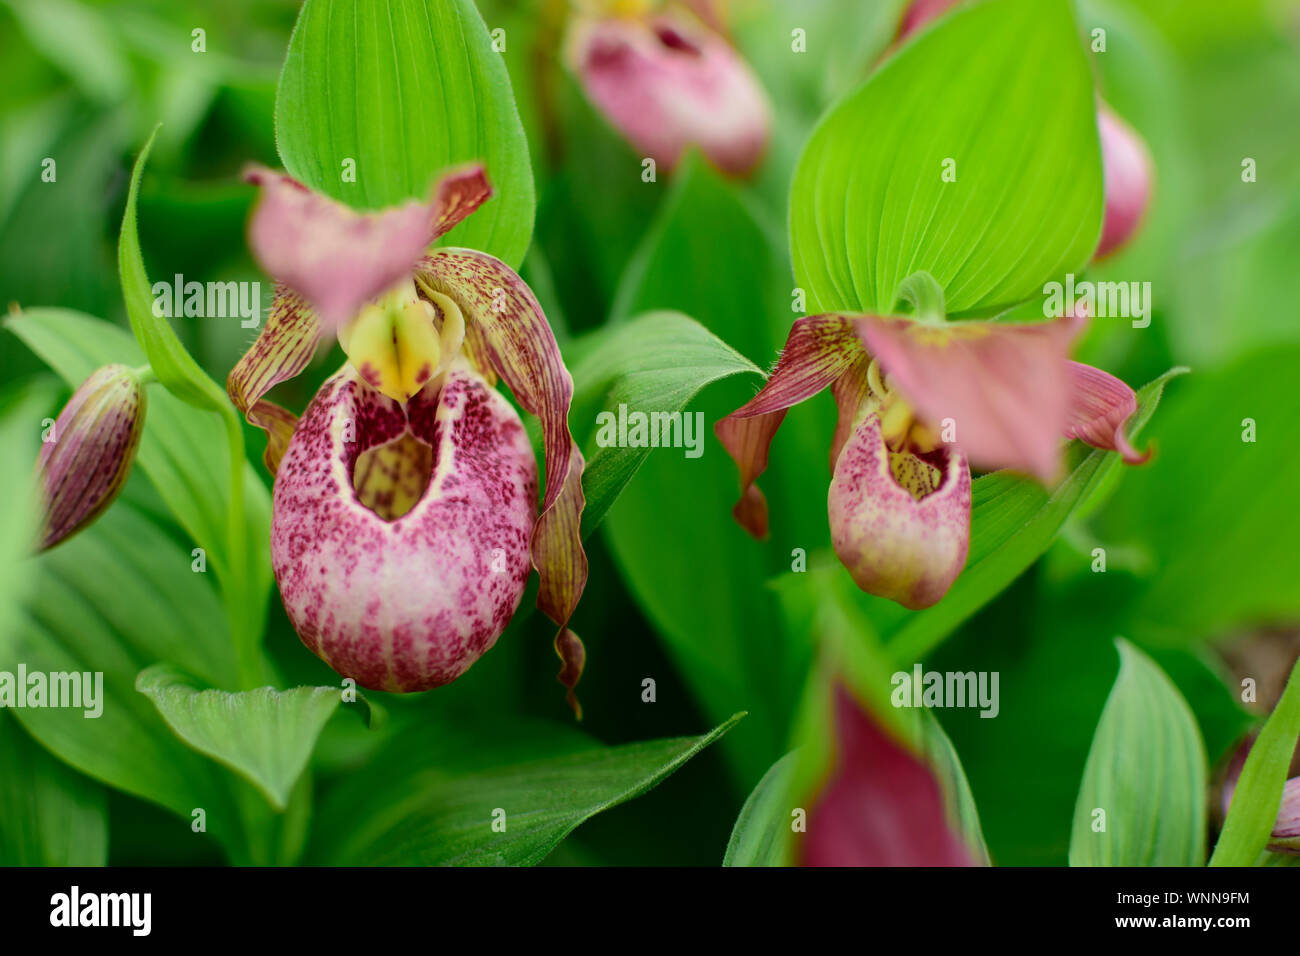 Beautiful of pink Paphiopedilum orchid flower with blurred green leaves background. Nature concept. Stock Photo